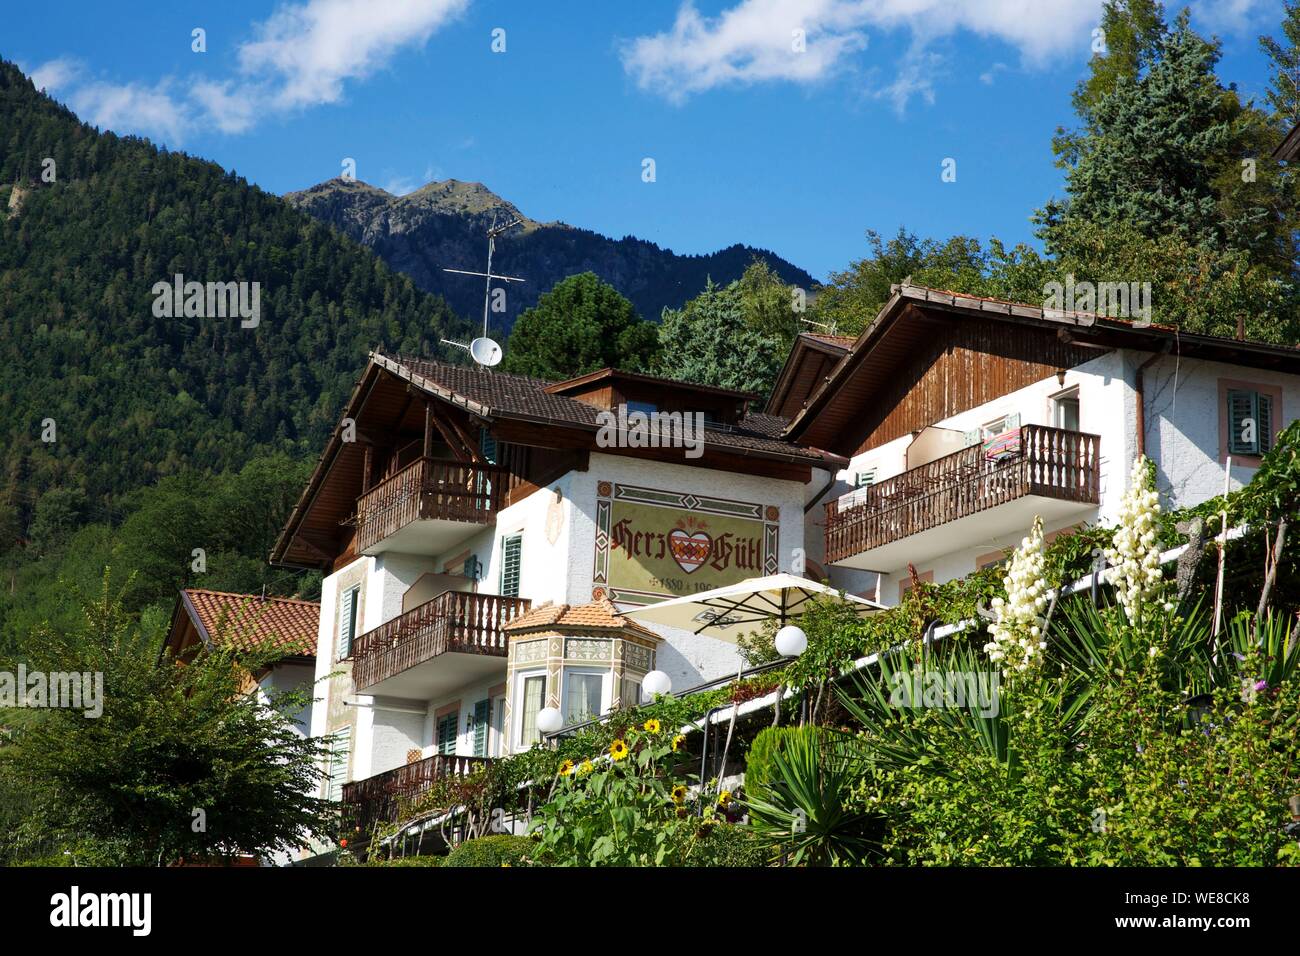 Italy, autonomous province of Bolzano, Tirol, chalet with wooden balconies in the village of Tirol that gave its name to the Tyrol region Stock Photo